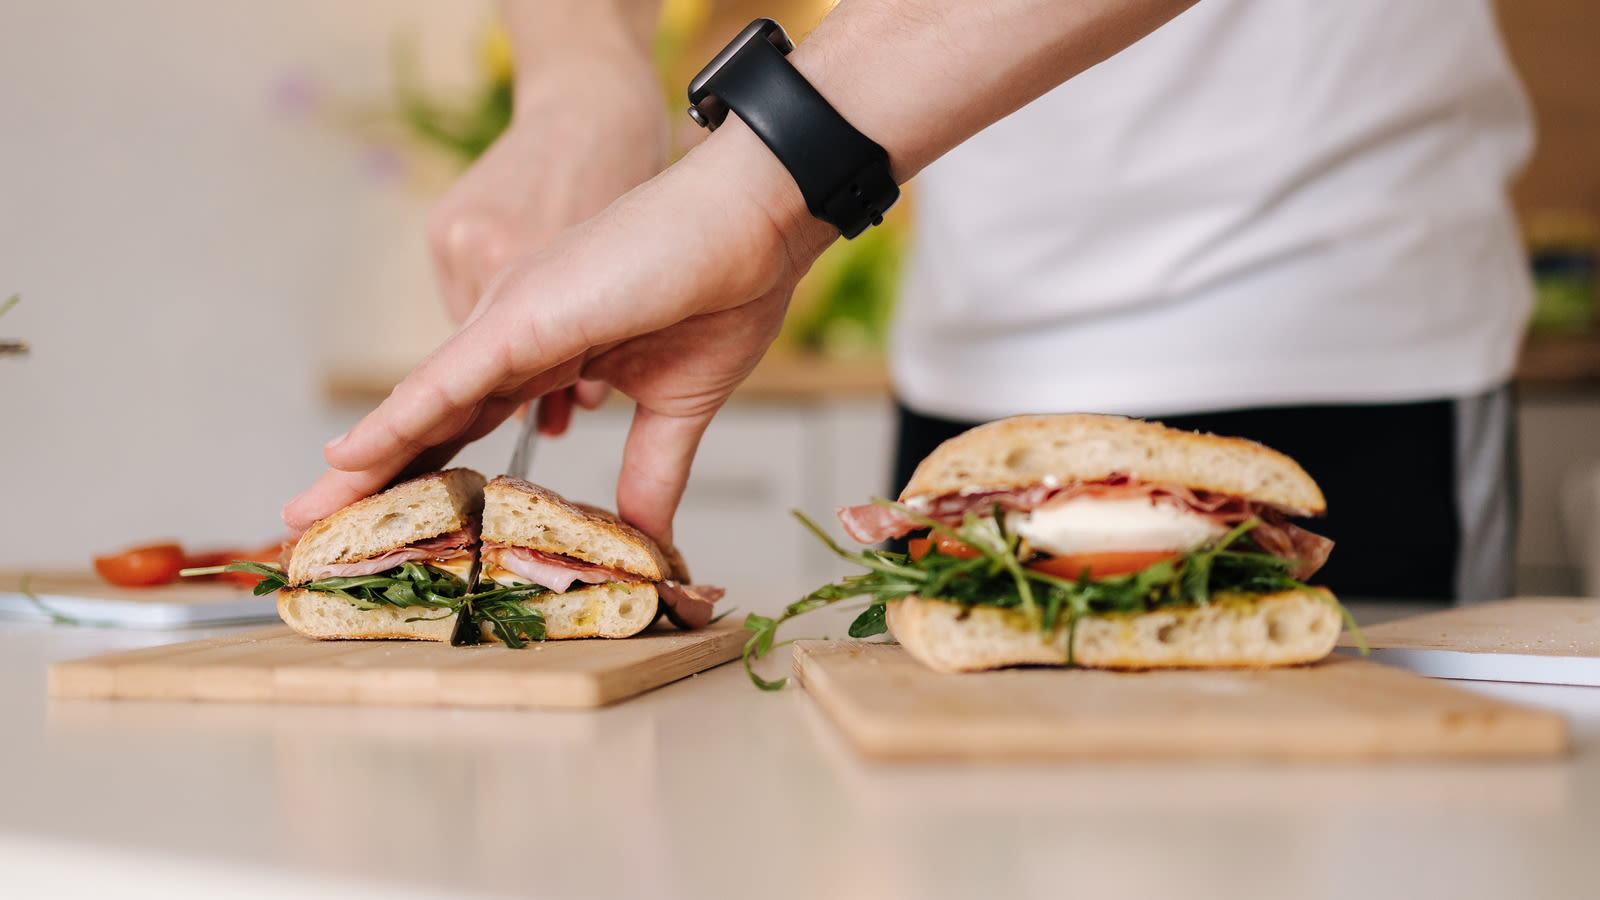 This Viral Sandwich Cutting Hack Is Honestly Kind Of Genius